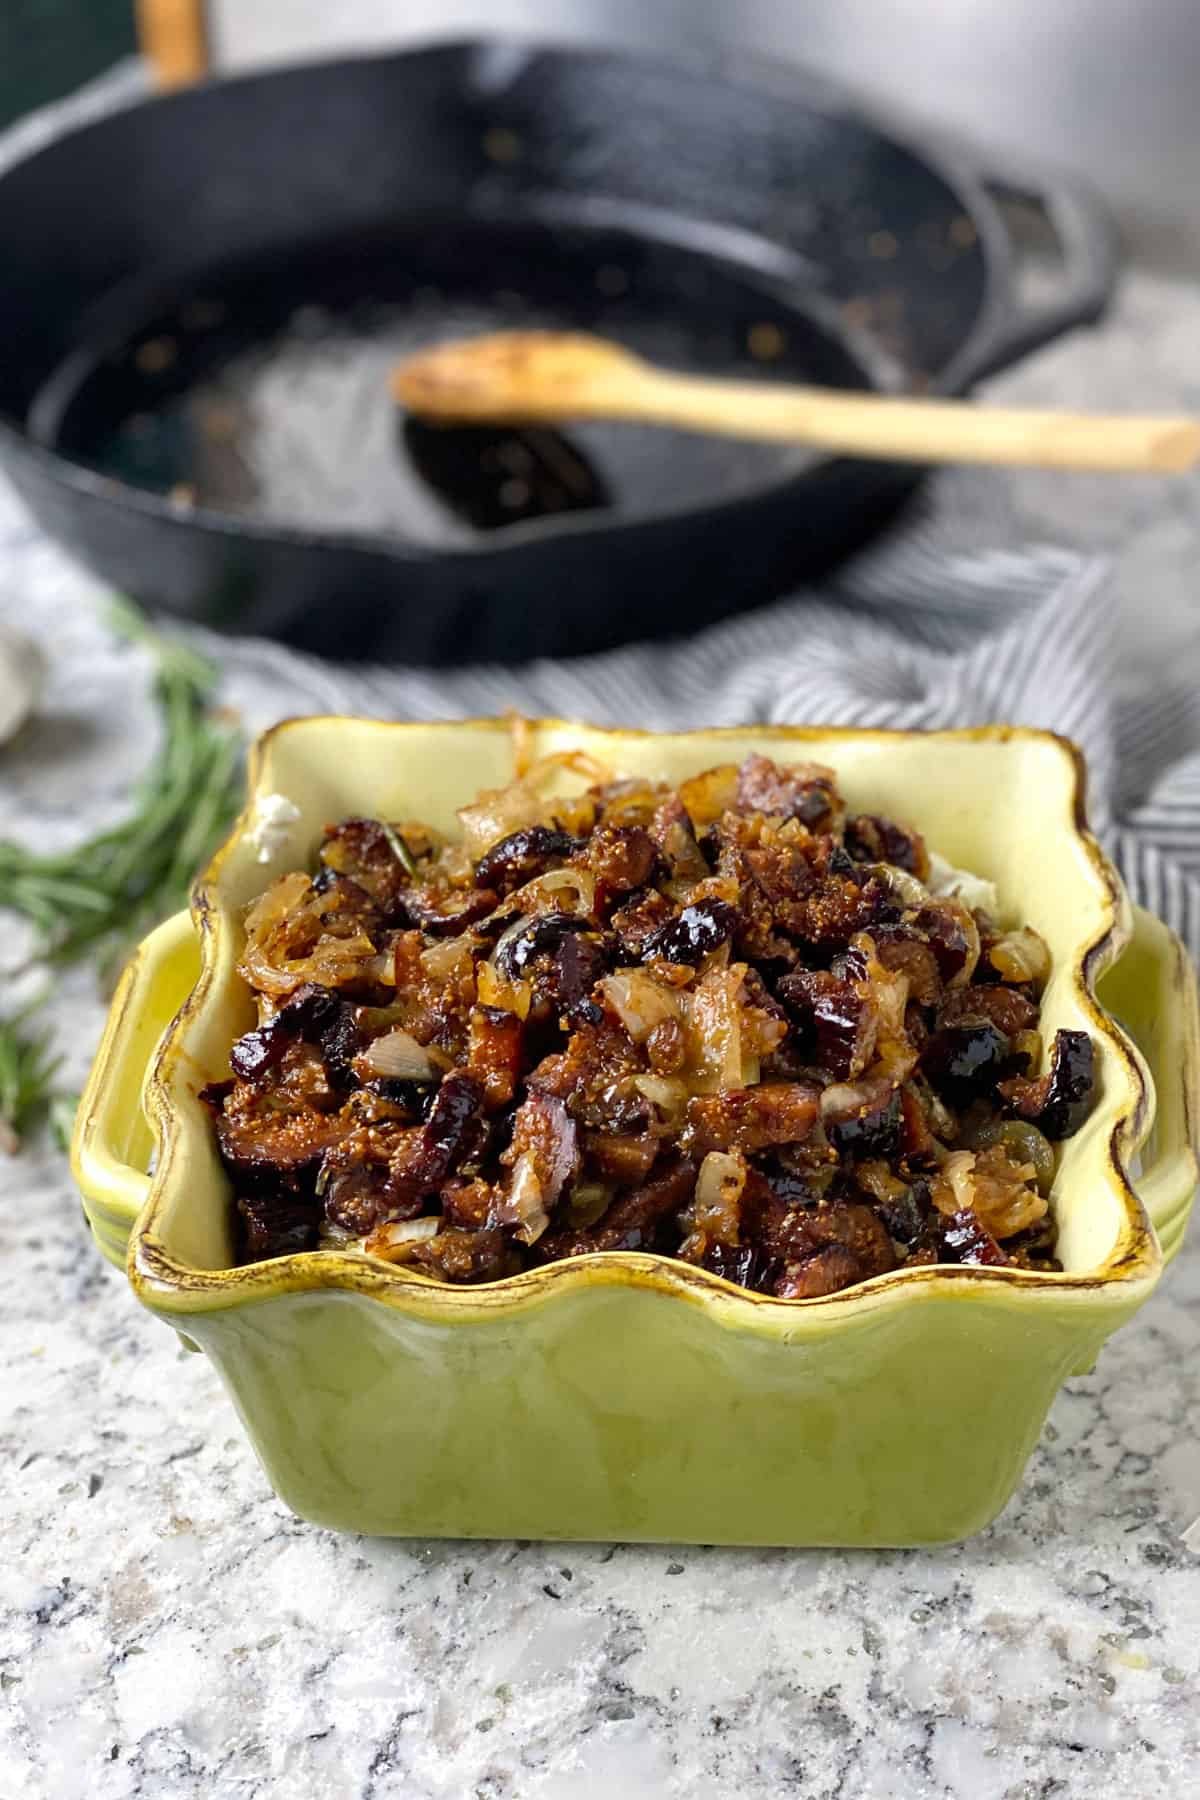 Goat cheese in a casserole with caramelized onions and figs on top